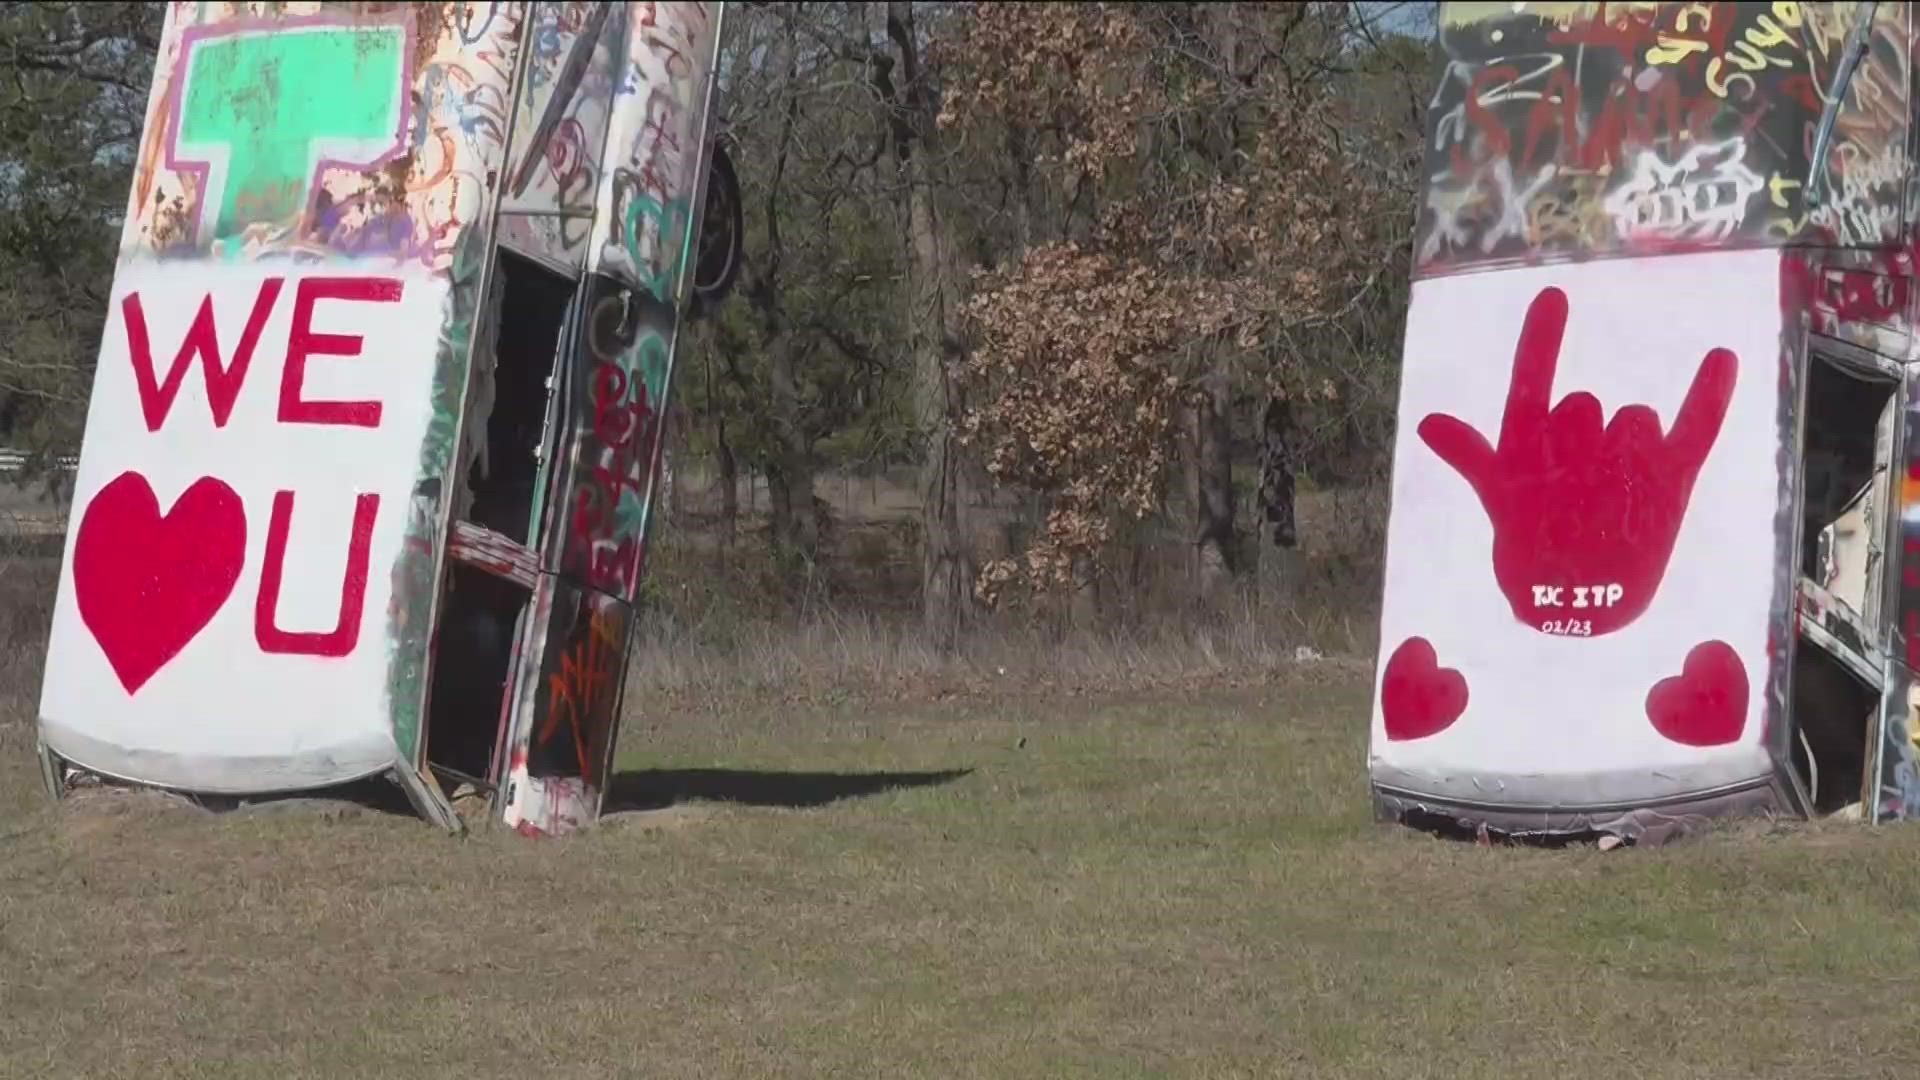 They made a few pieces of art in different cities that say 'I love you' in sign language to bring awareness to the deaf and hard of hearing community.